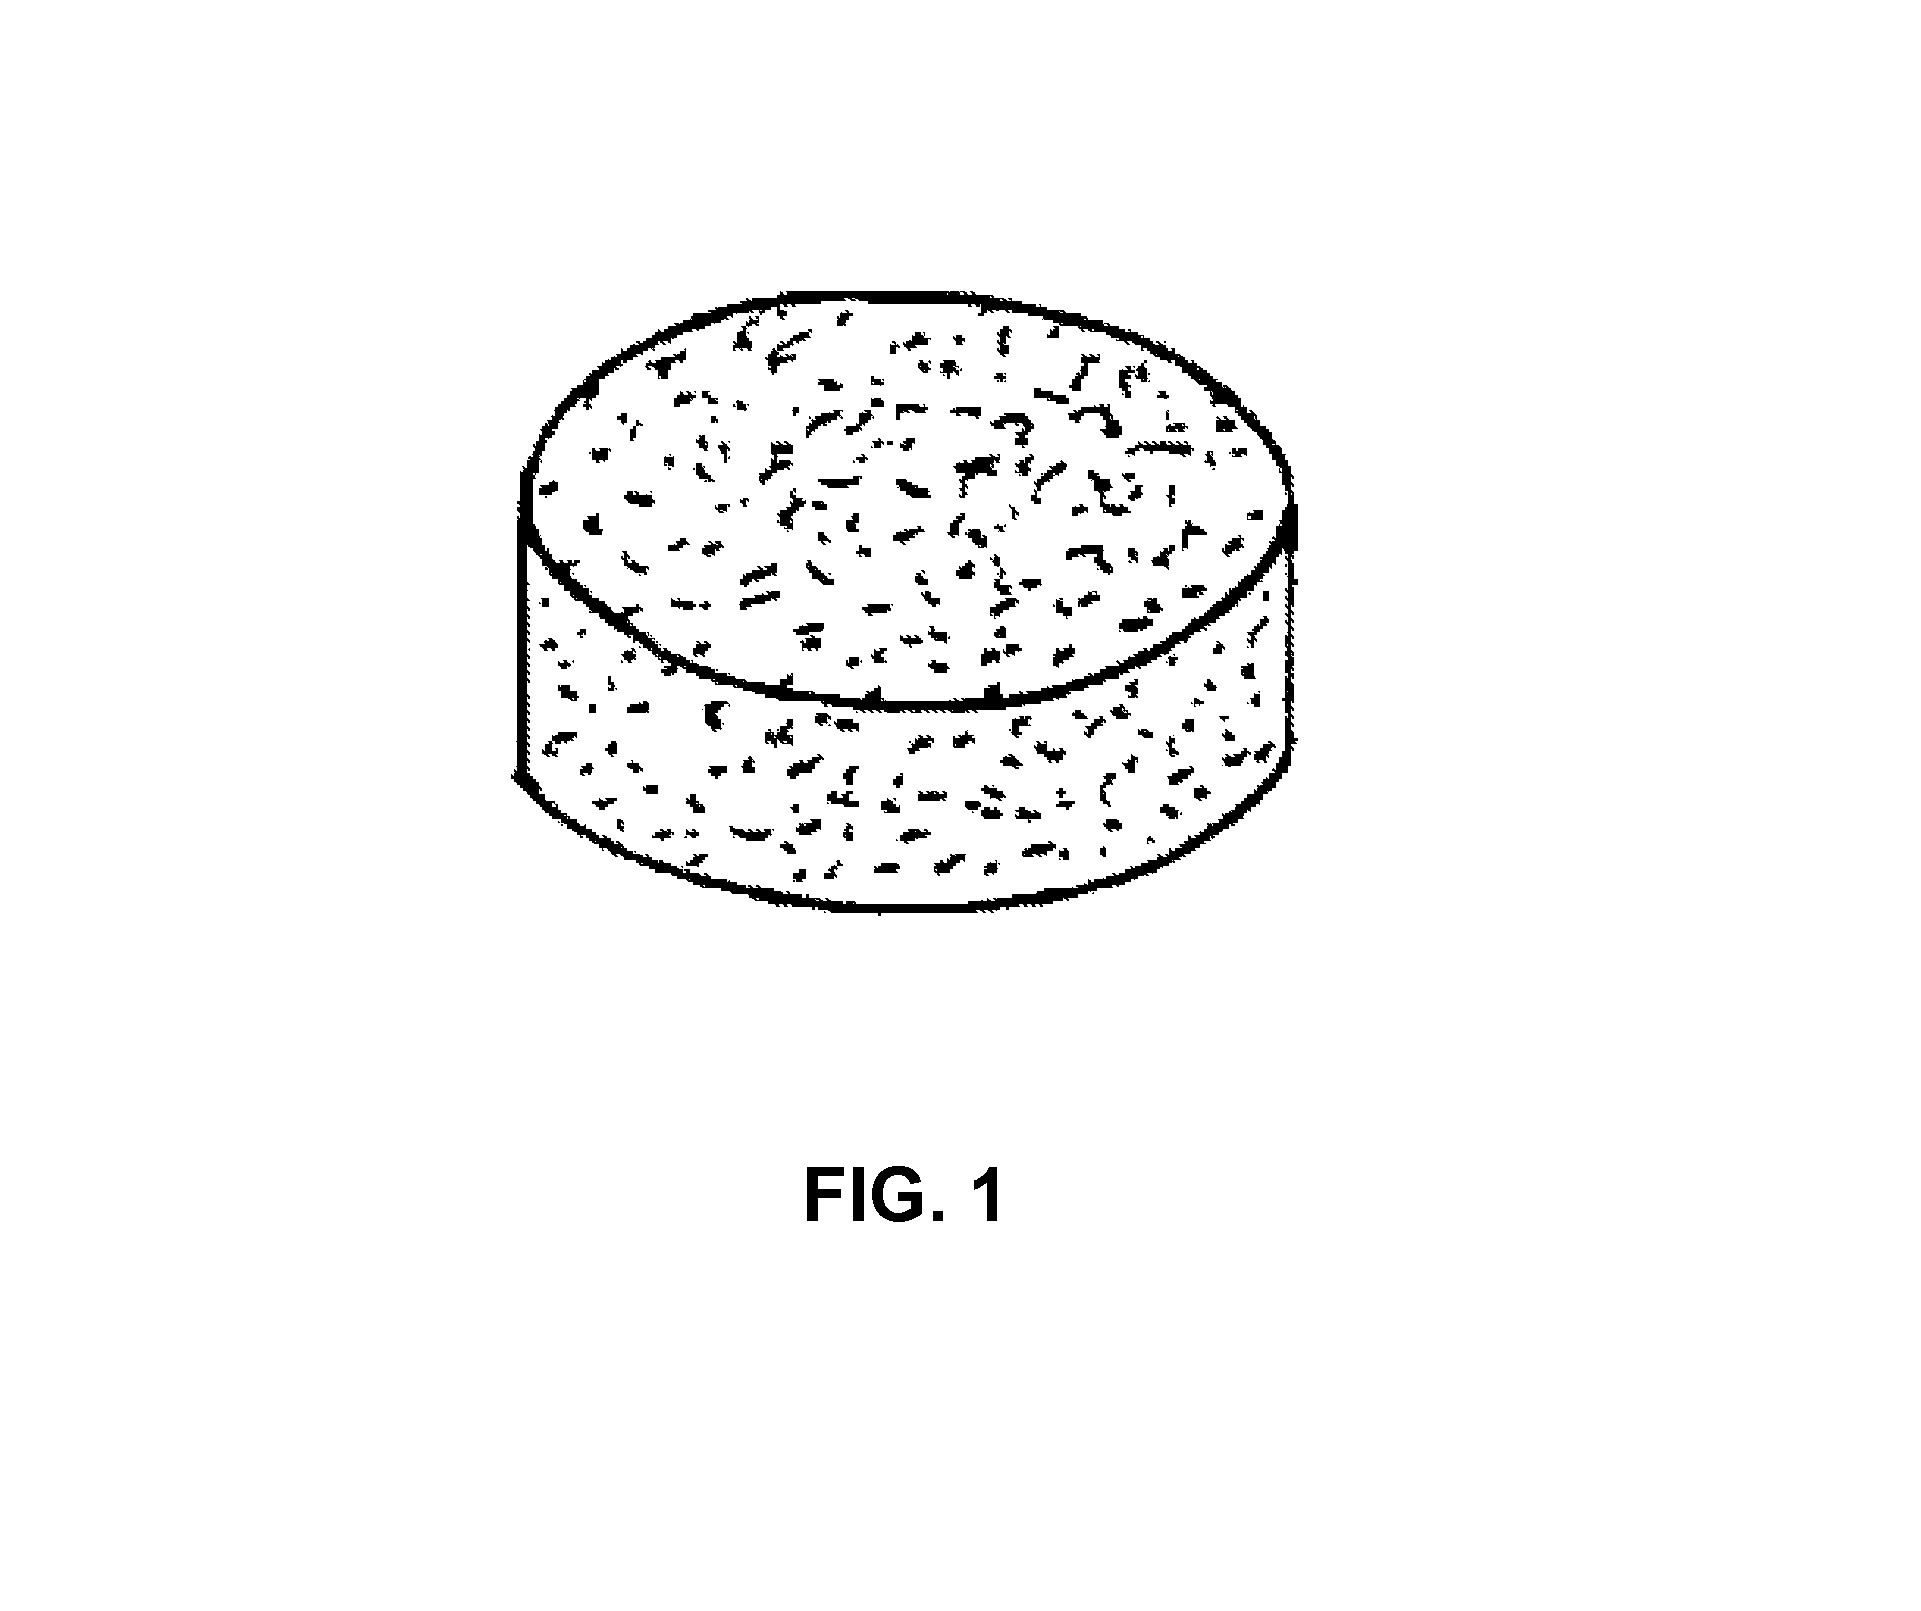 Method of making calcium chloride&mdash;aggregate composition